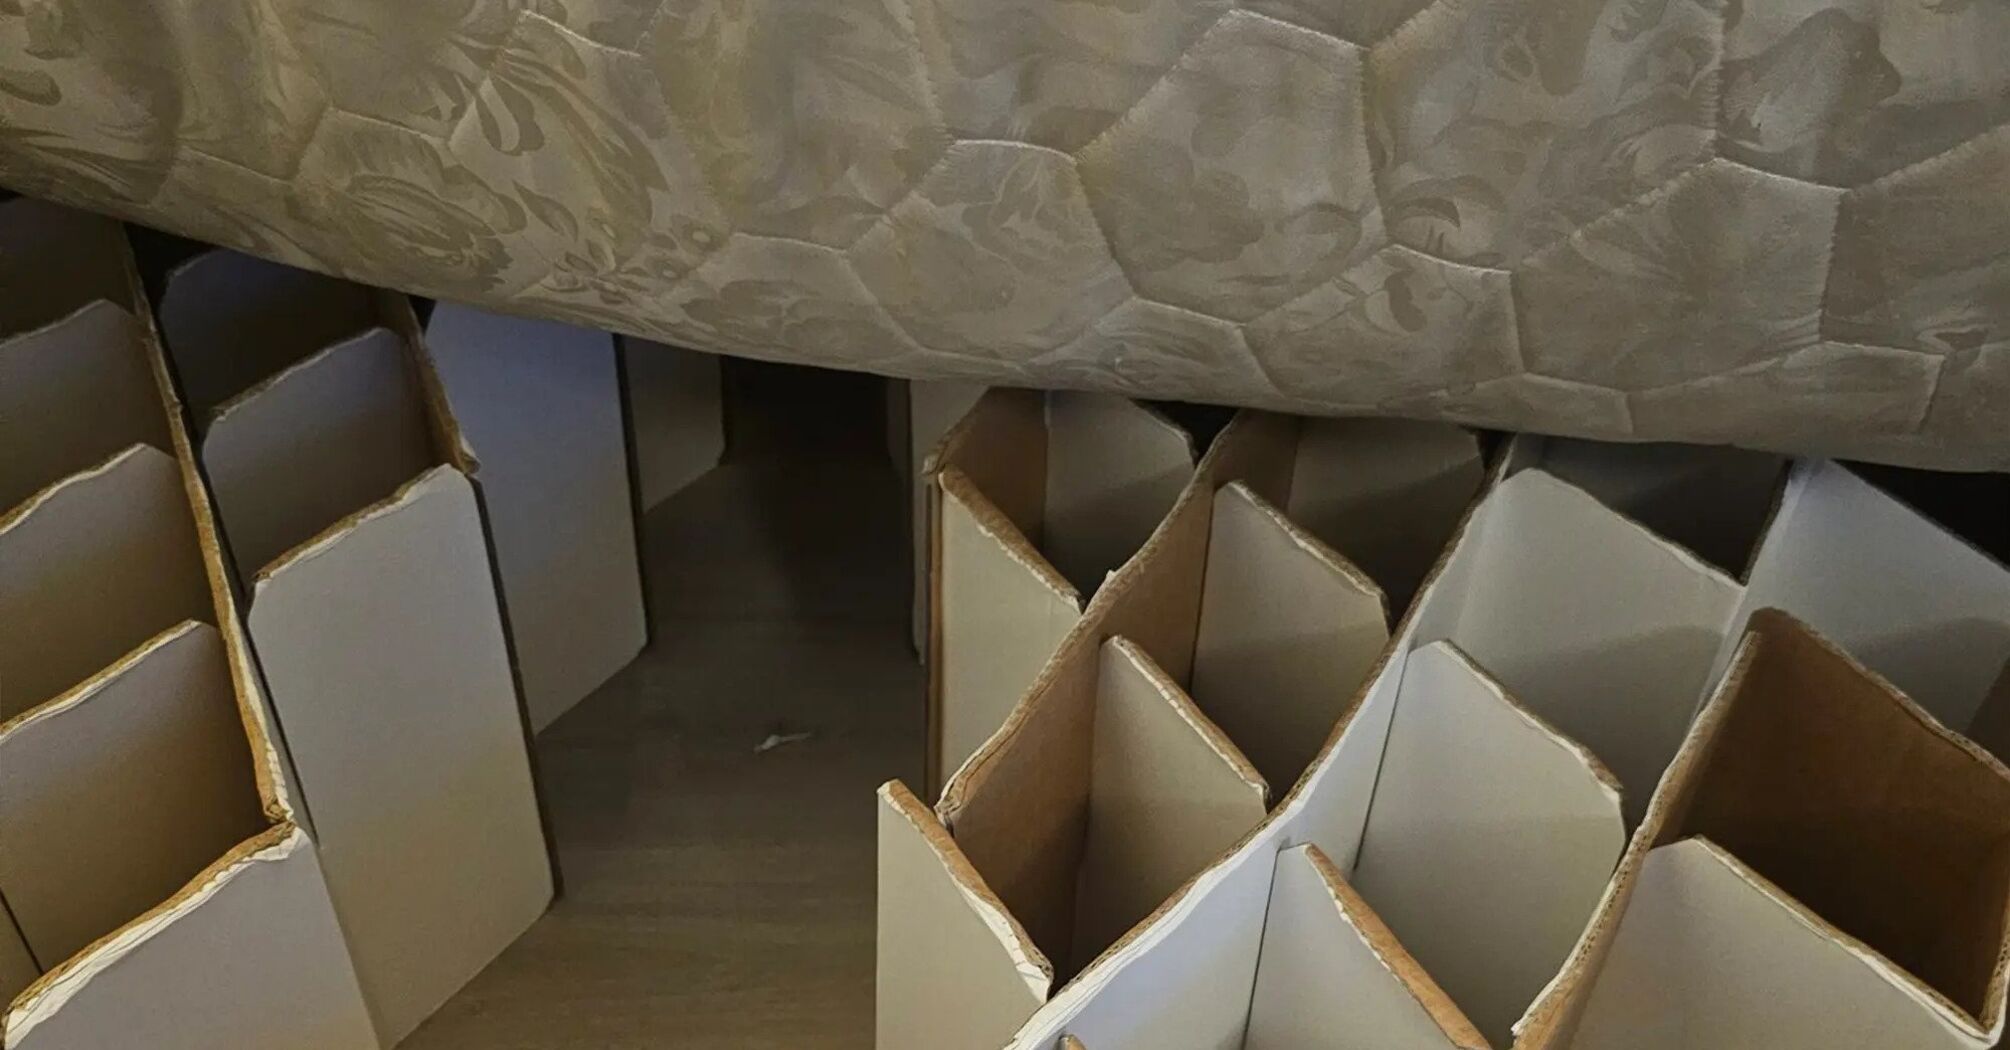 Guest arrives at hotel reservation to discover a cardboard ‘dungeon’ bed